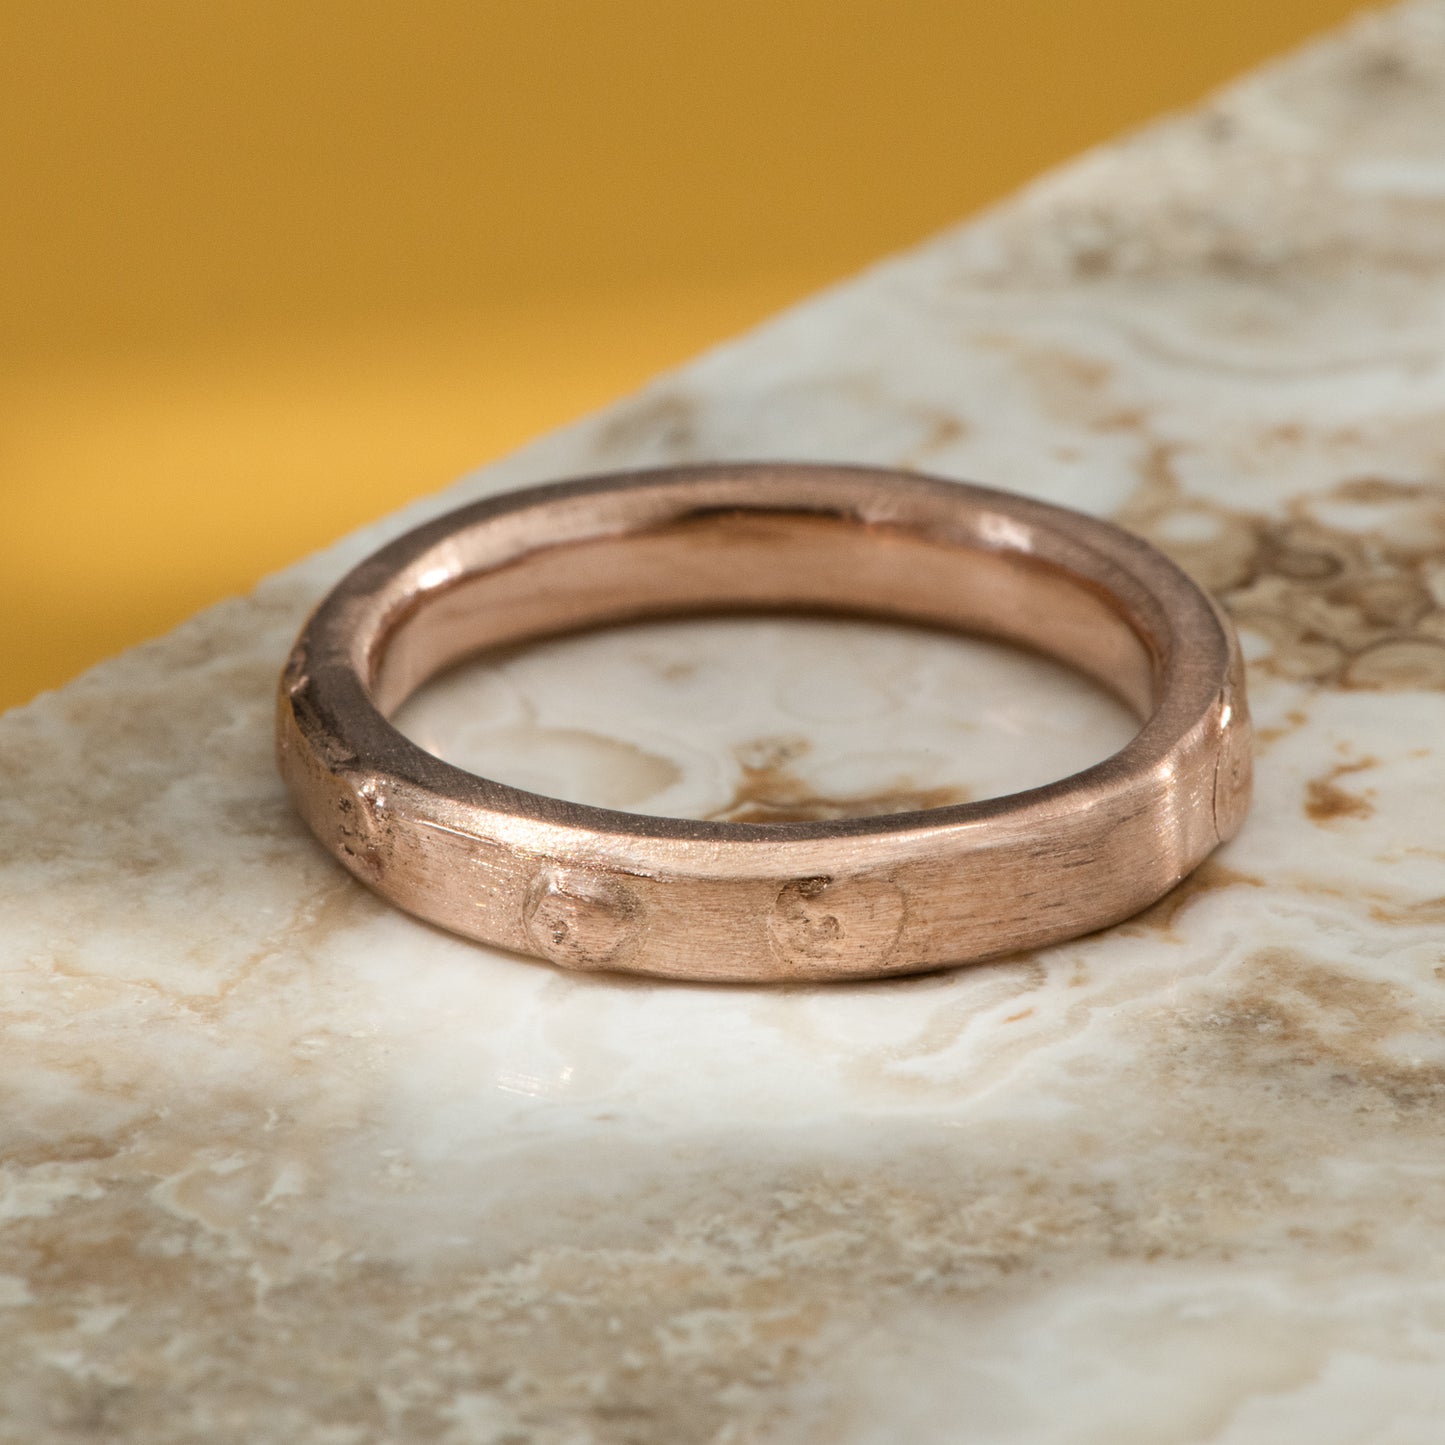 Satin finished rose gold band, with small burls all around the ring.